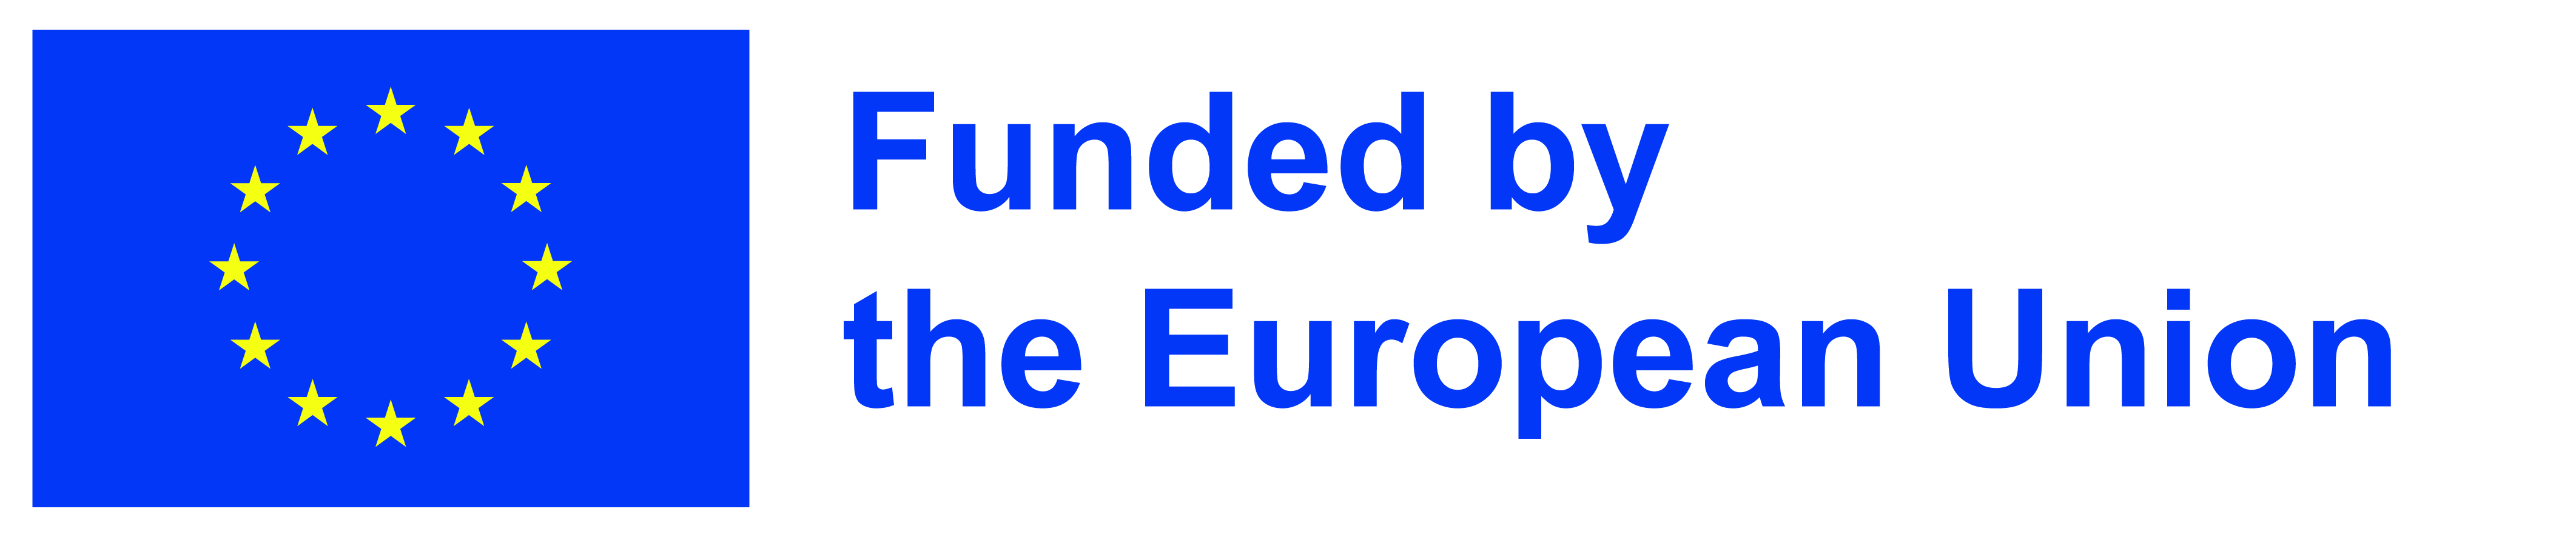 Logo: Funded by the European Union.